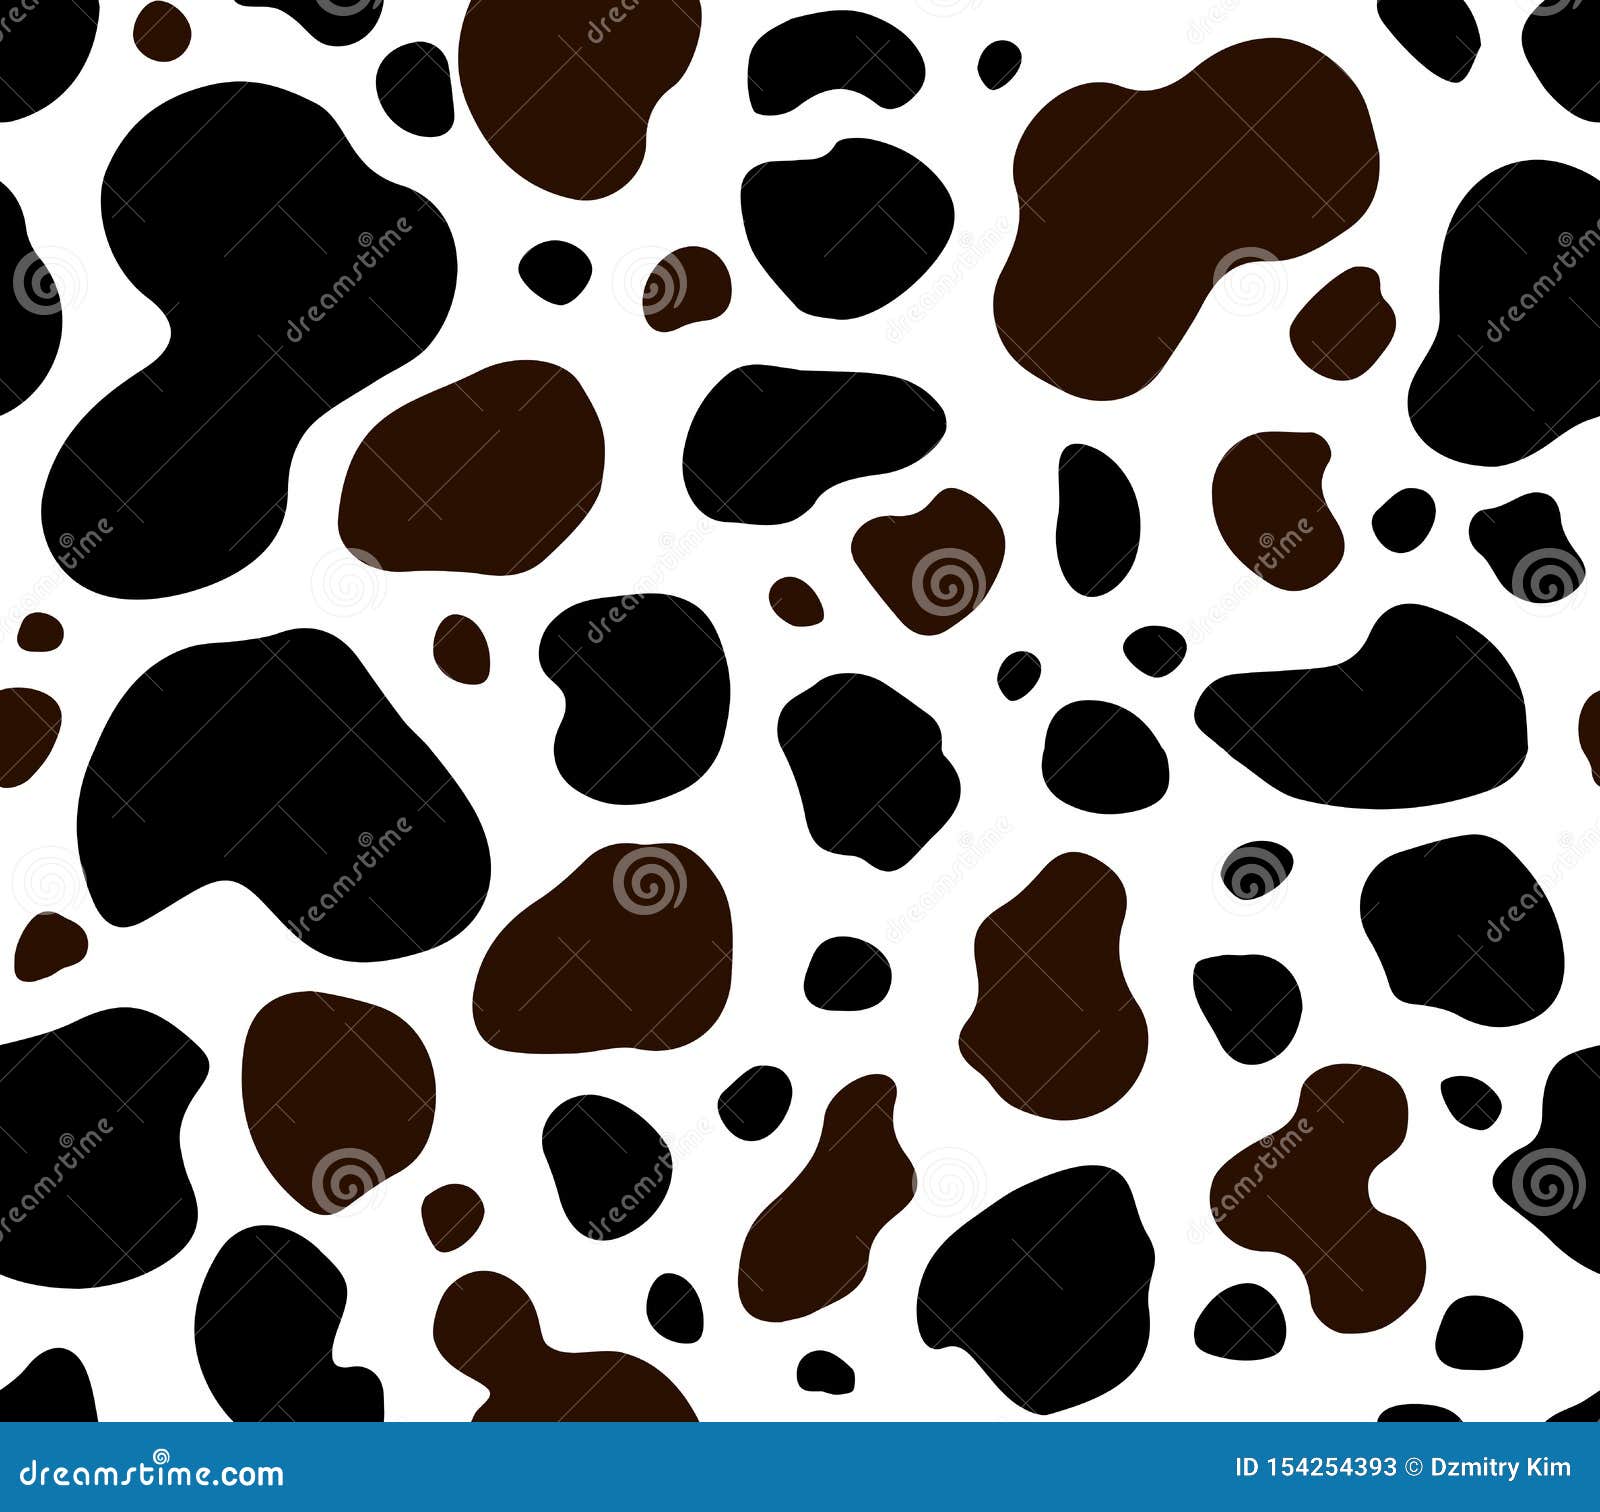 Texture Repeated Seamless Brown Black White Stock Vector - Illustration black, print: 154254393